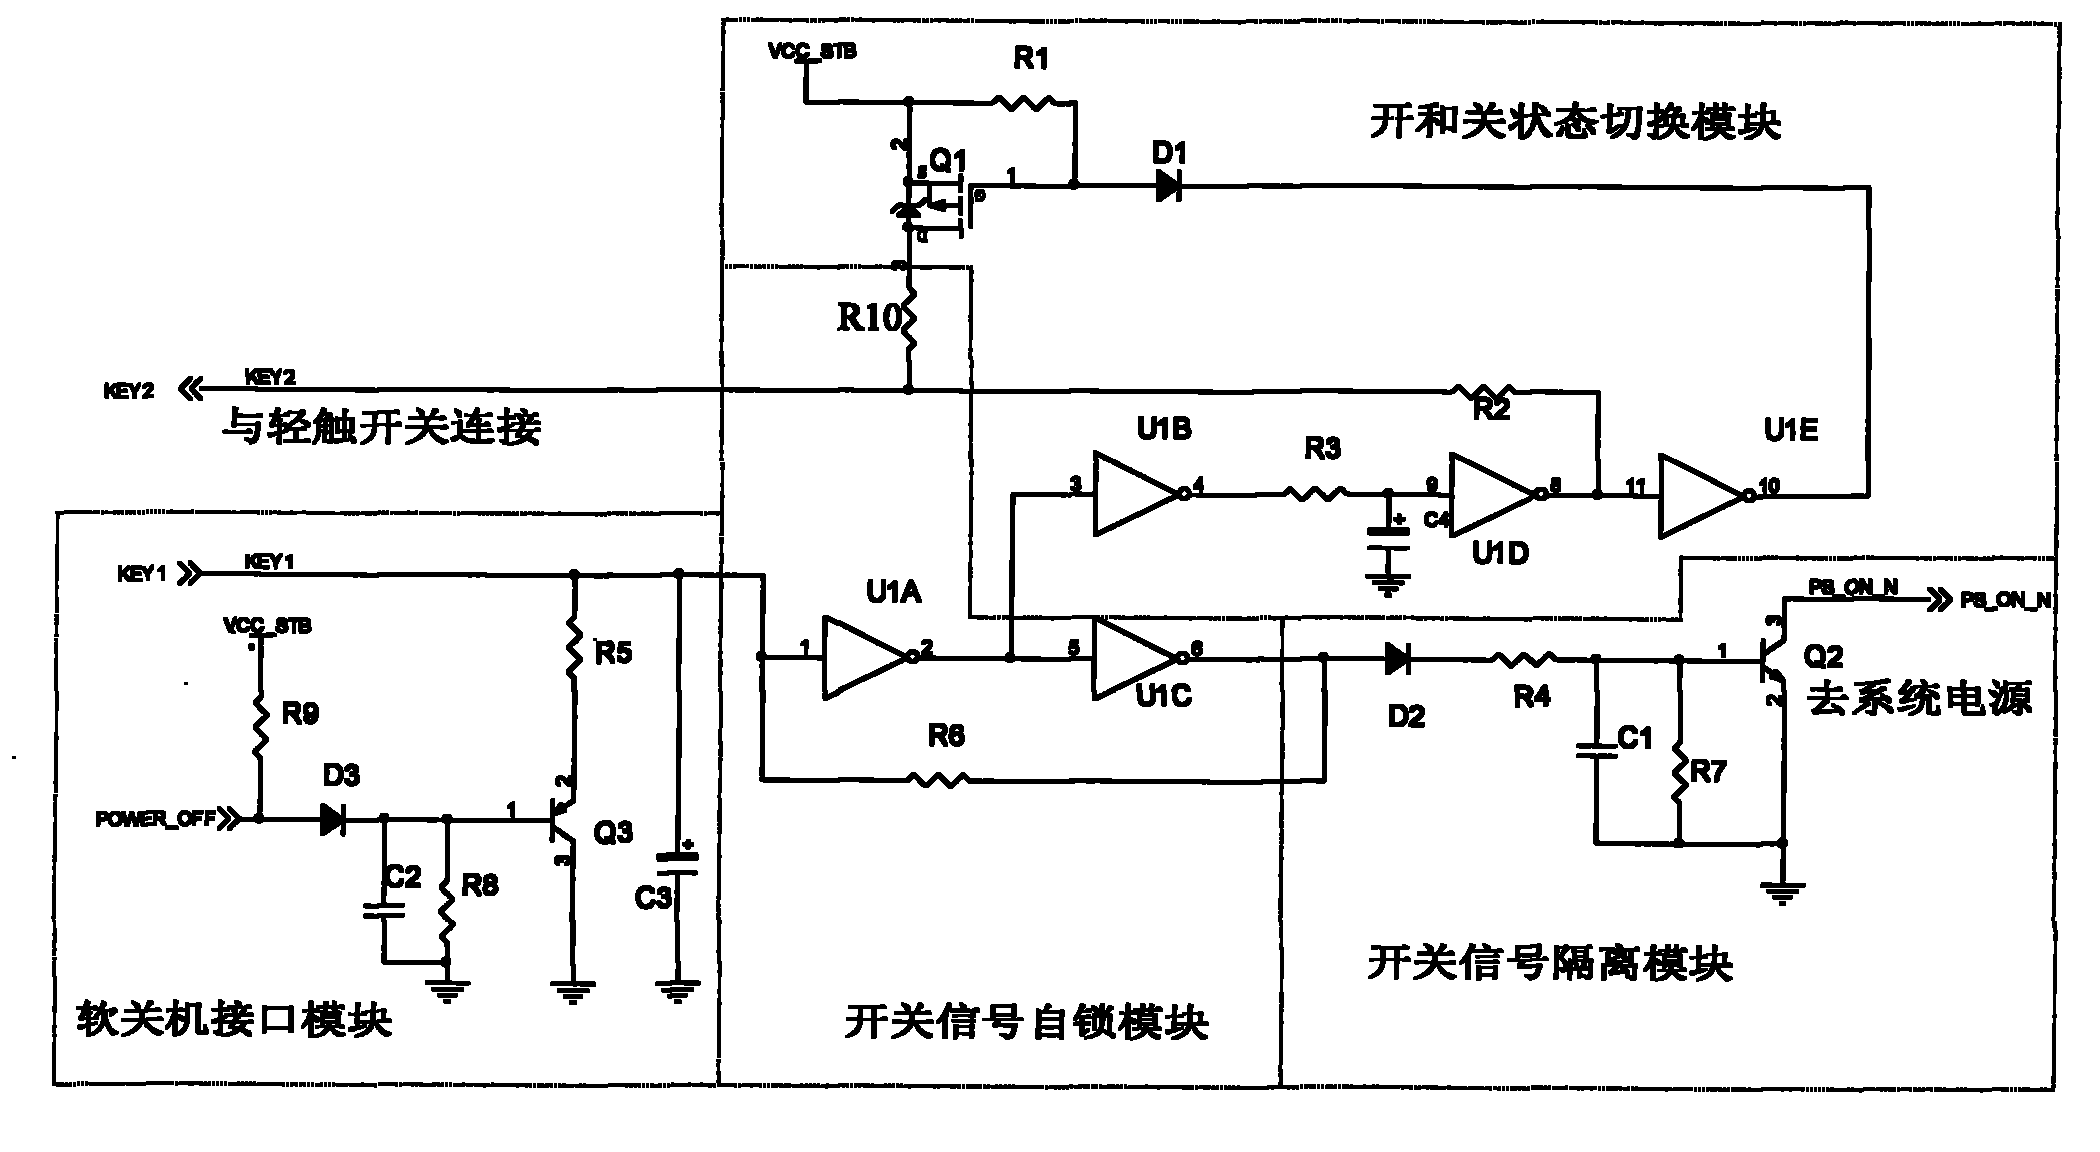 Anti-strong interference switch control signal generating circuit of system power supply